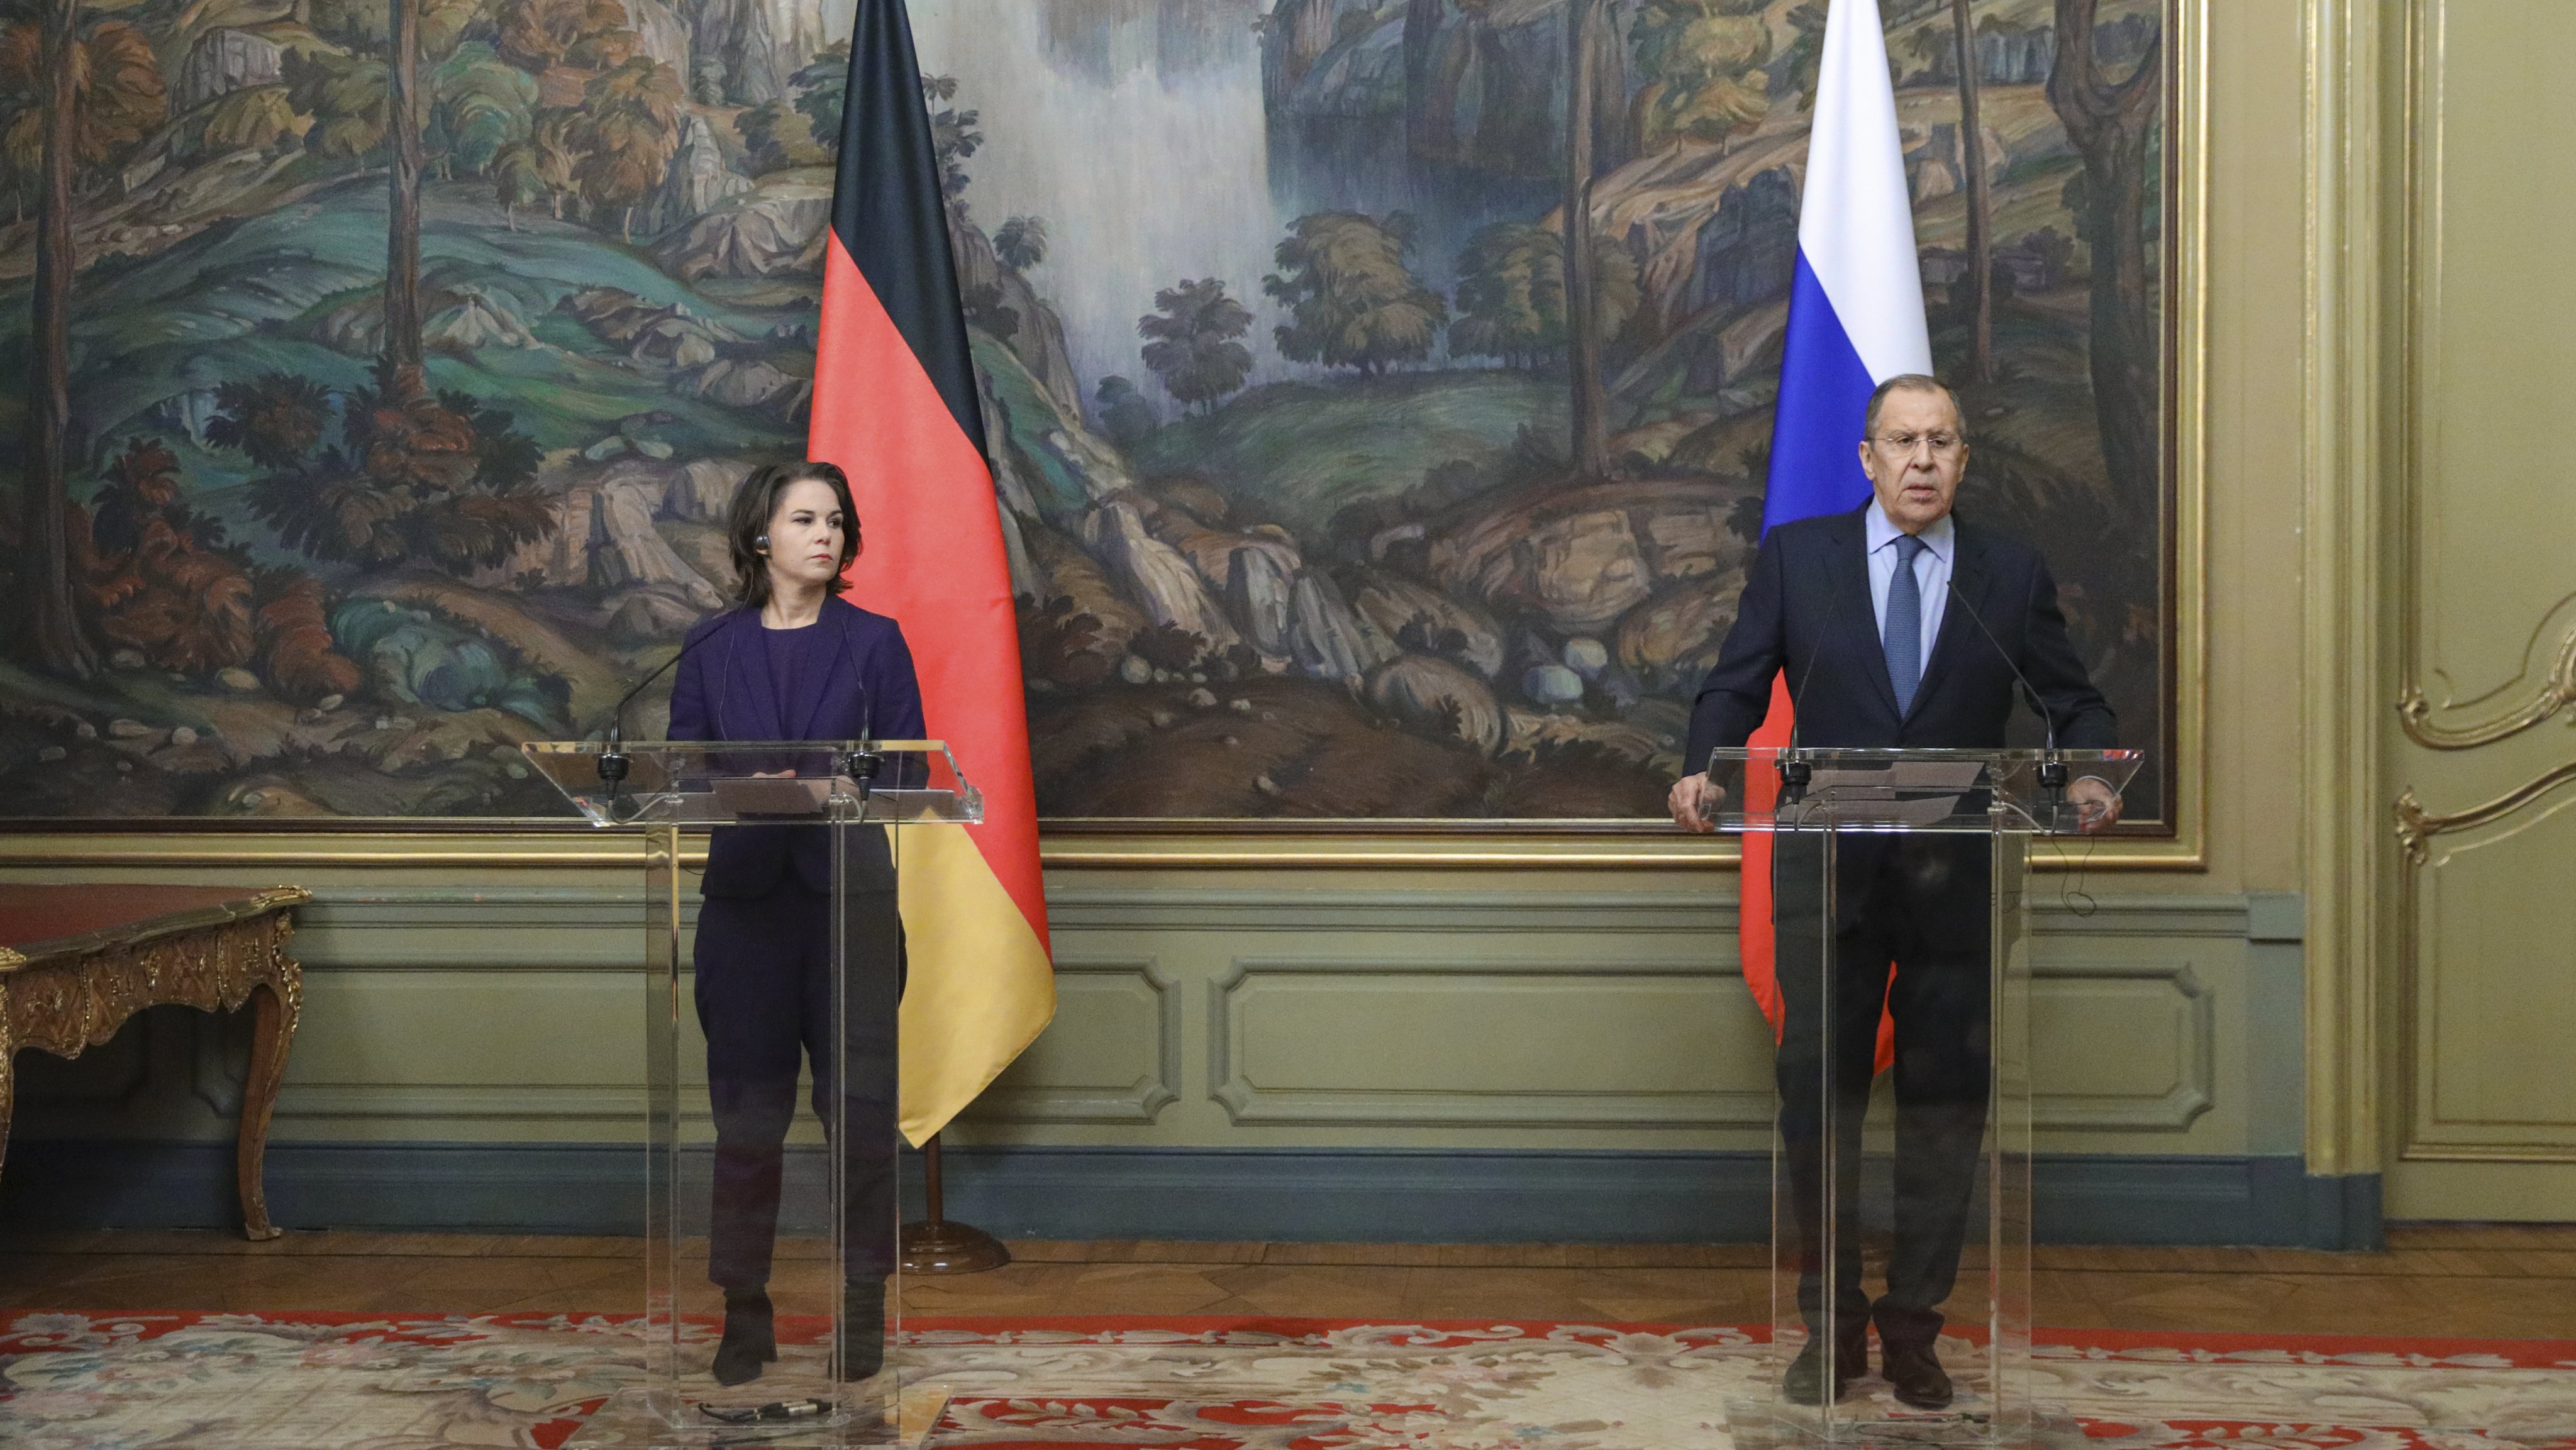 Foreign ministers of Russia and Germany meet in Moscow